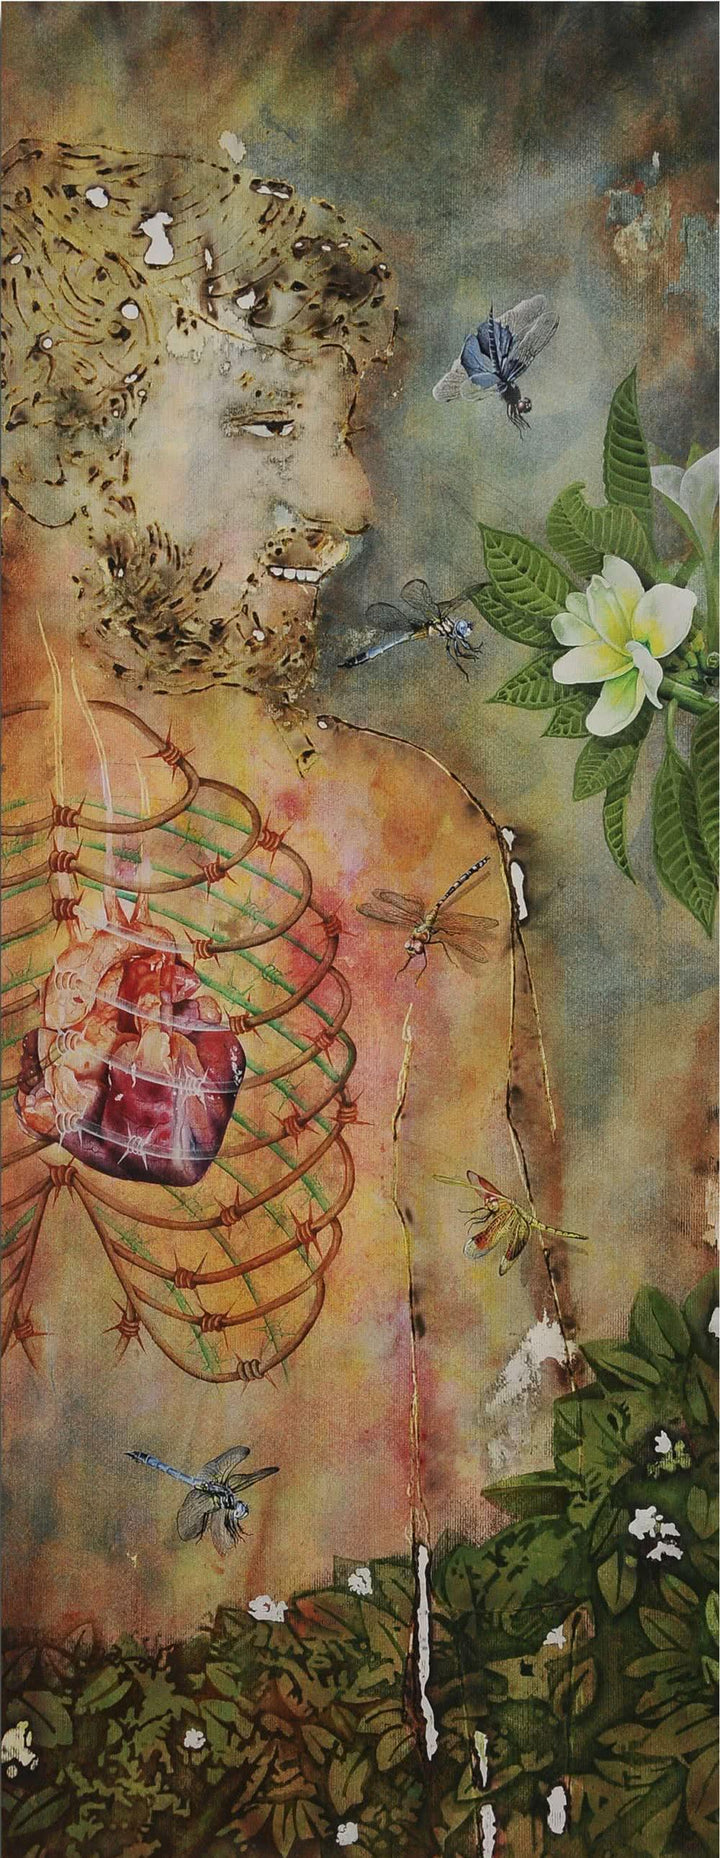 Self And Nature 1 Painting by Rama Reddy | ArtZolo.com